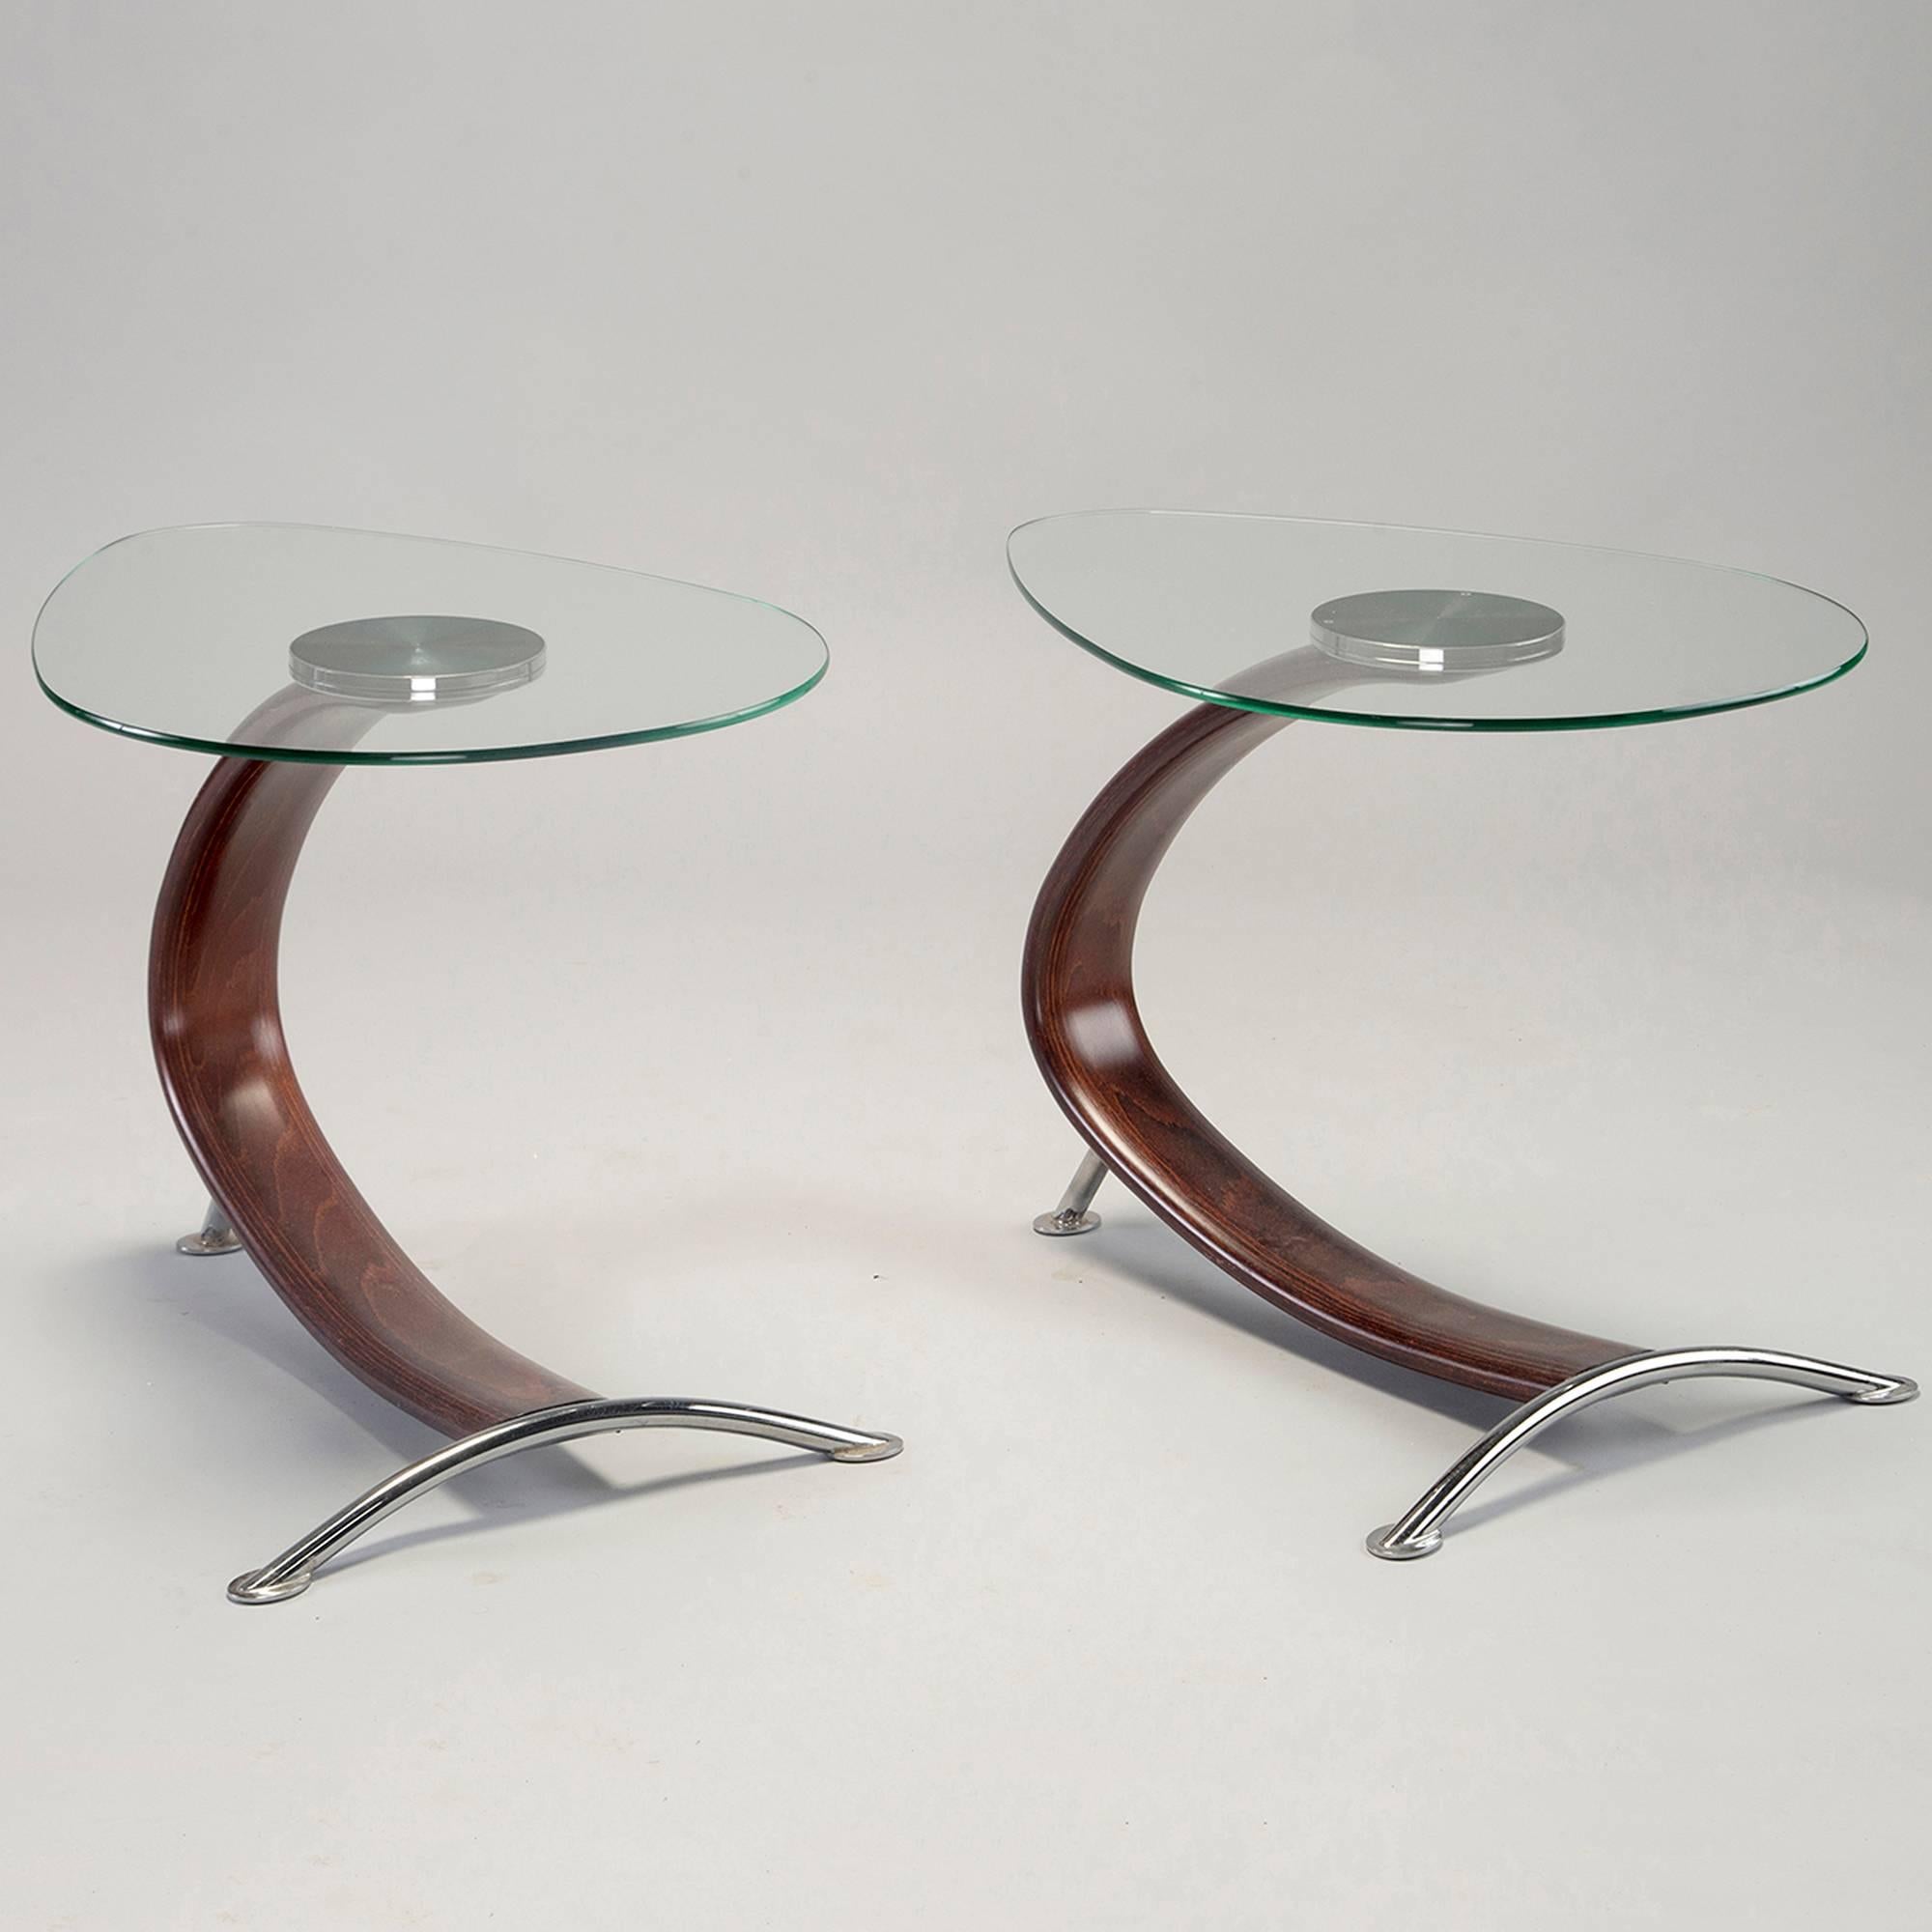 Italian Pair of Glass Top Midcentury End Tables with Bentwood and Chrome Bases